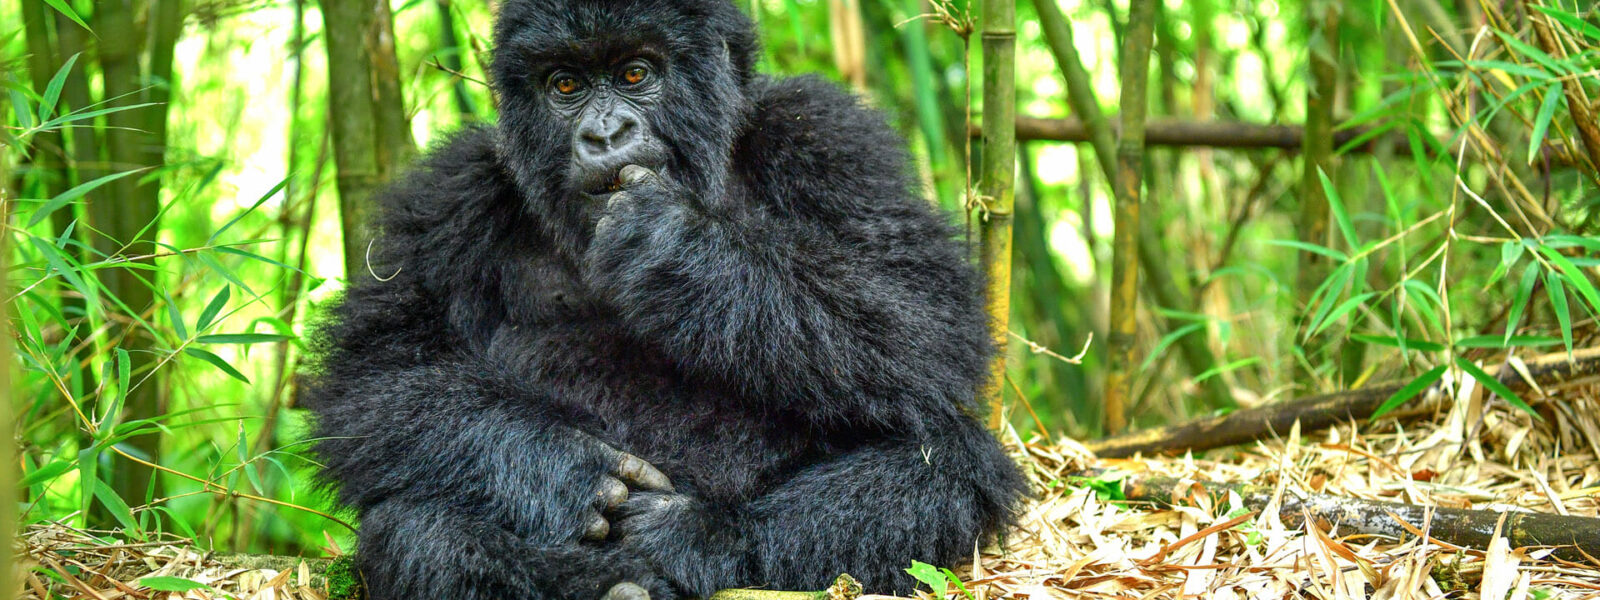 What is the Cost Price for Gorilla Habituation Permits in 2023?